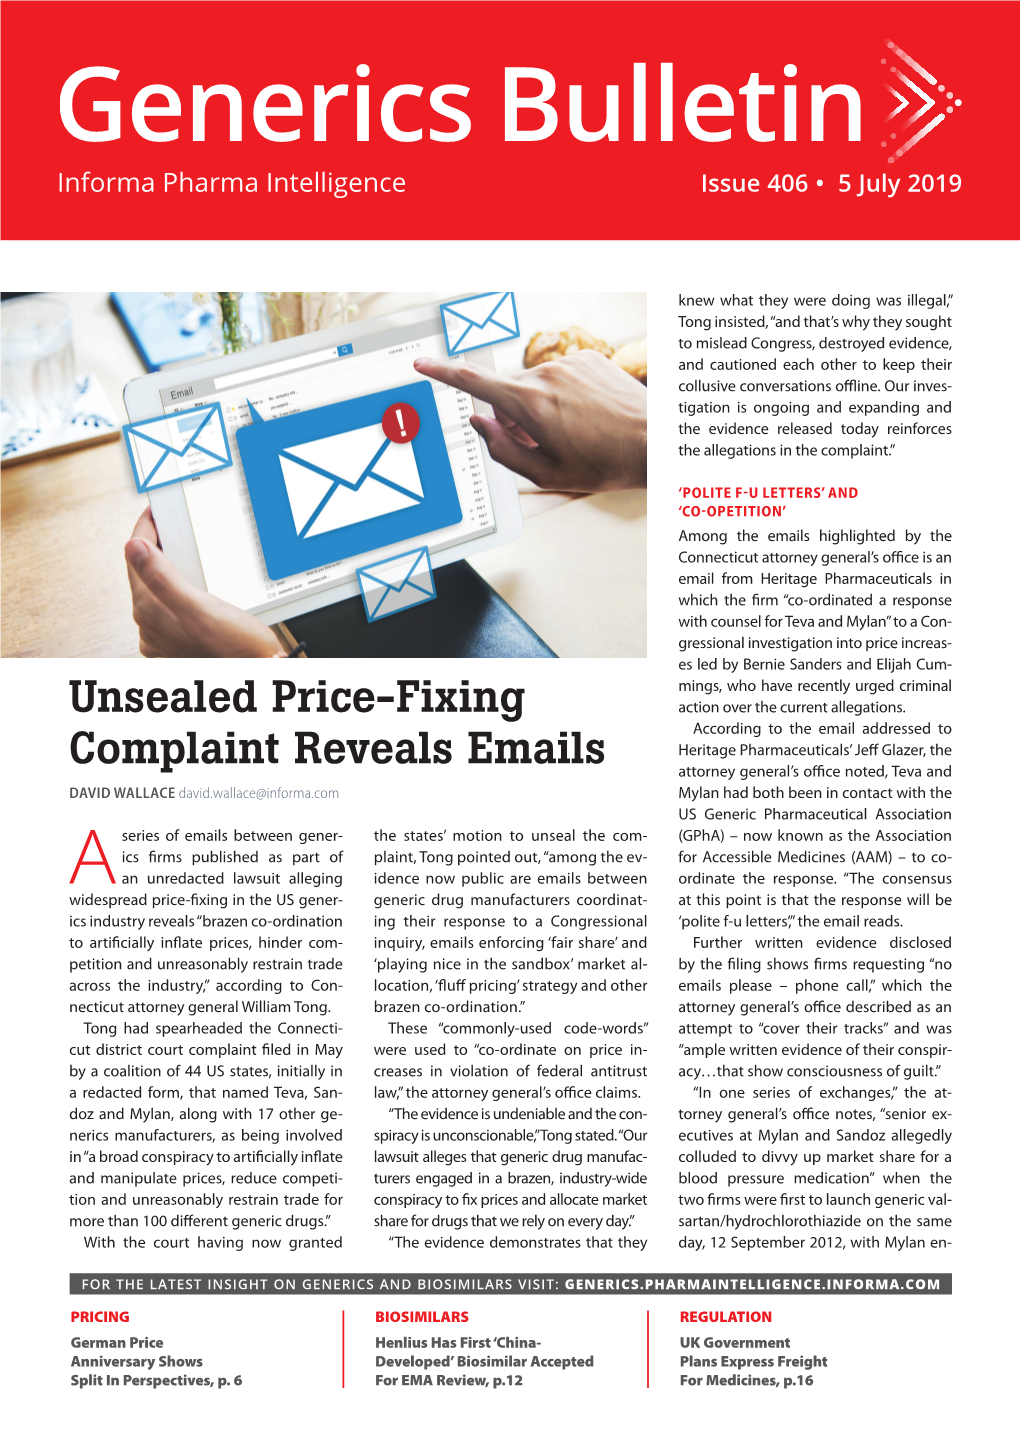 Unsealed Price-Fixing Complaint Reveals Emails